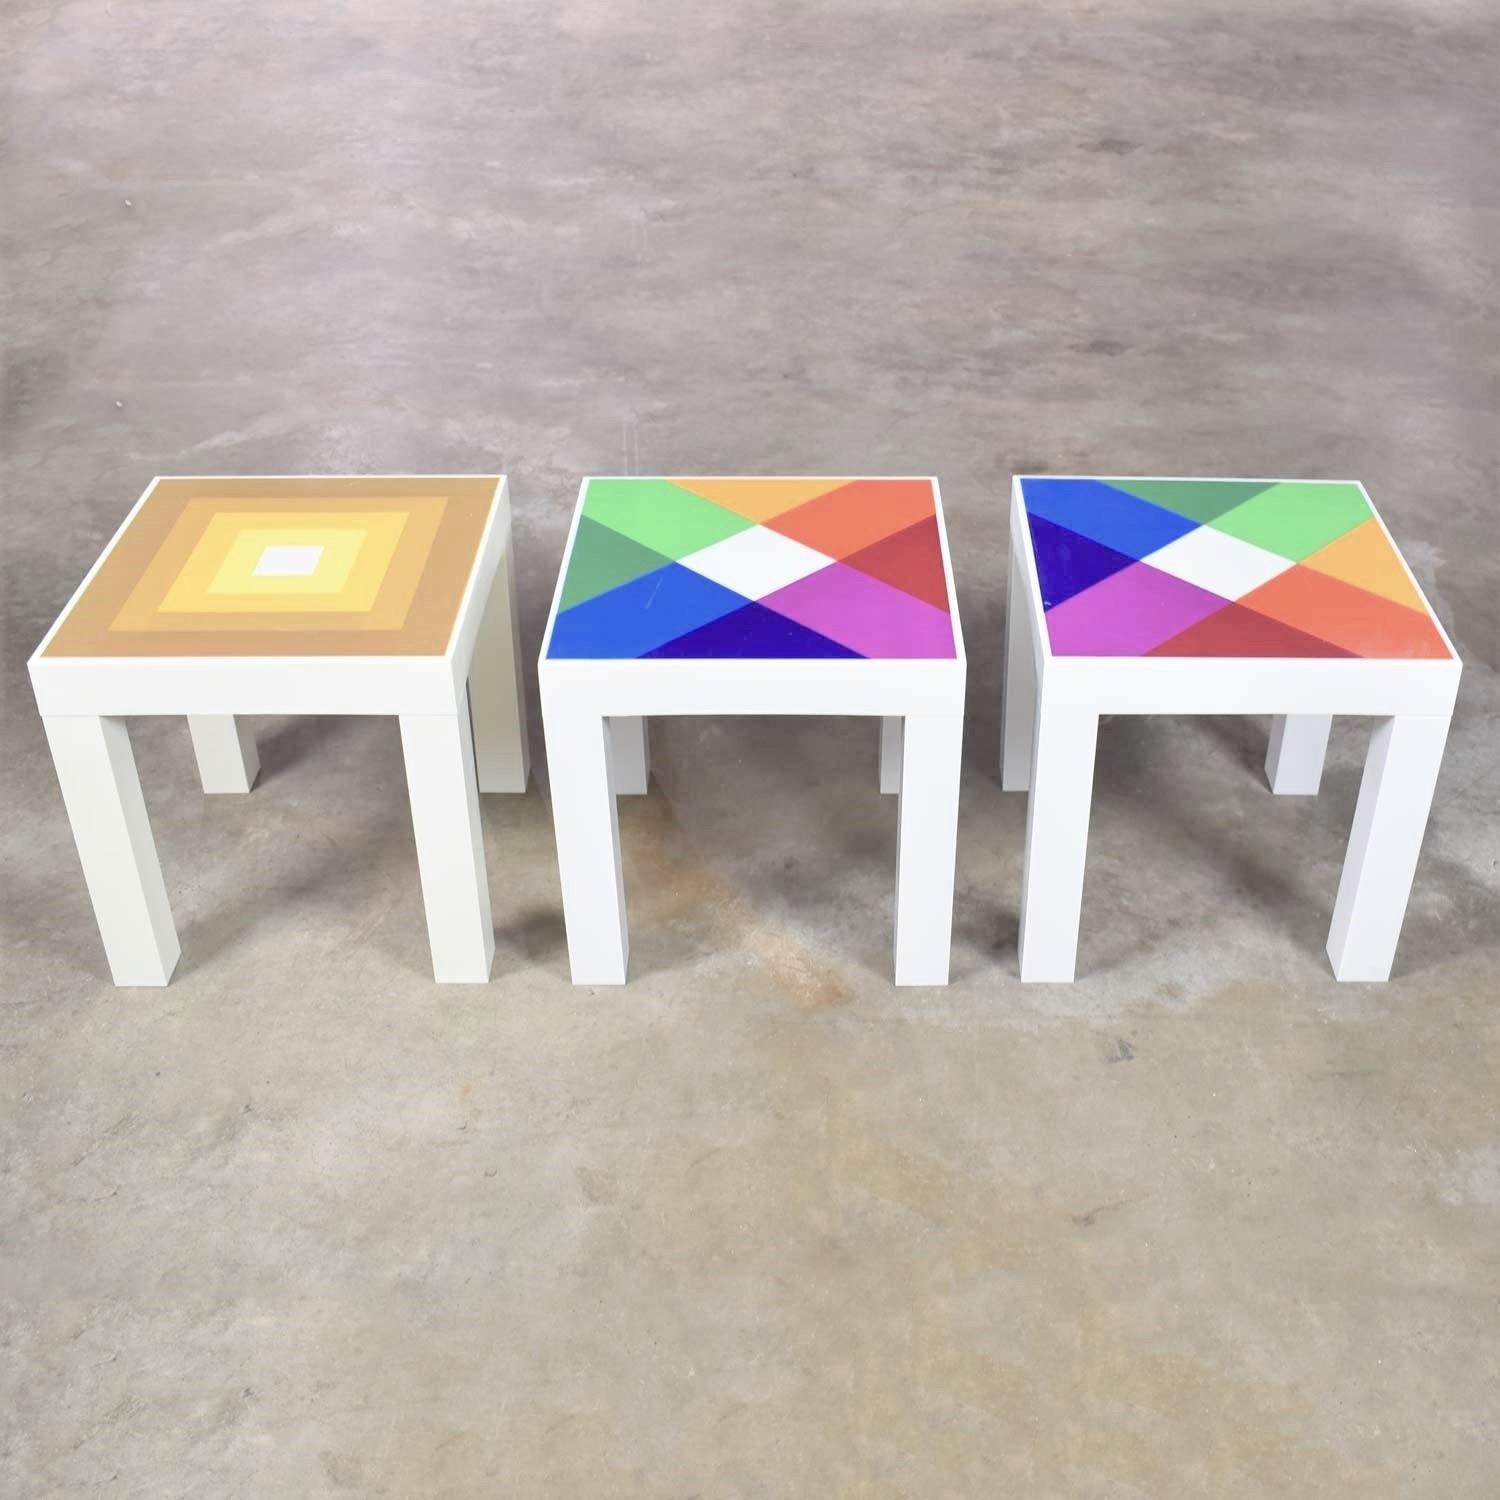 Trio Mod Pop Art Plastic Parsons Style Square Side Tables Style Kartell or Syroc In Good Condition For Sale In Topeka, KS